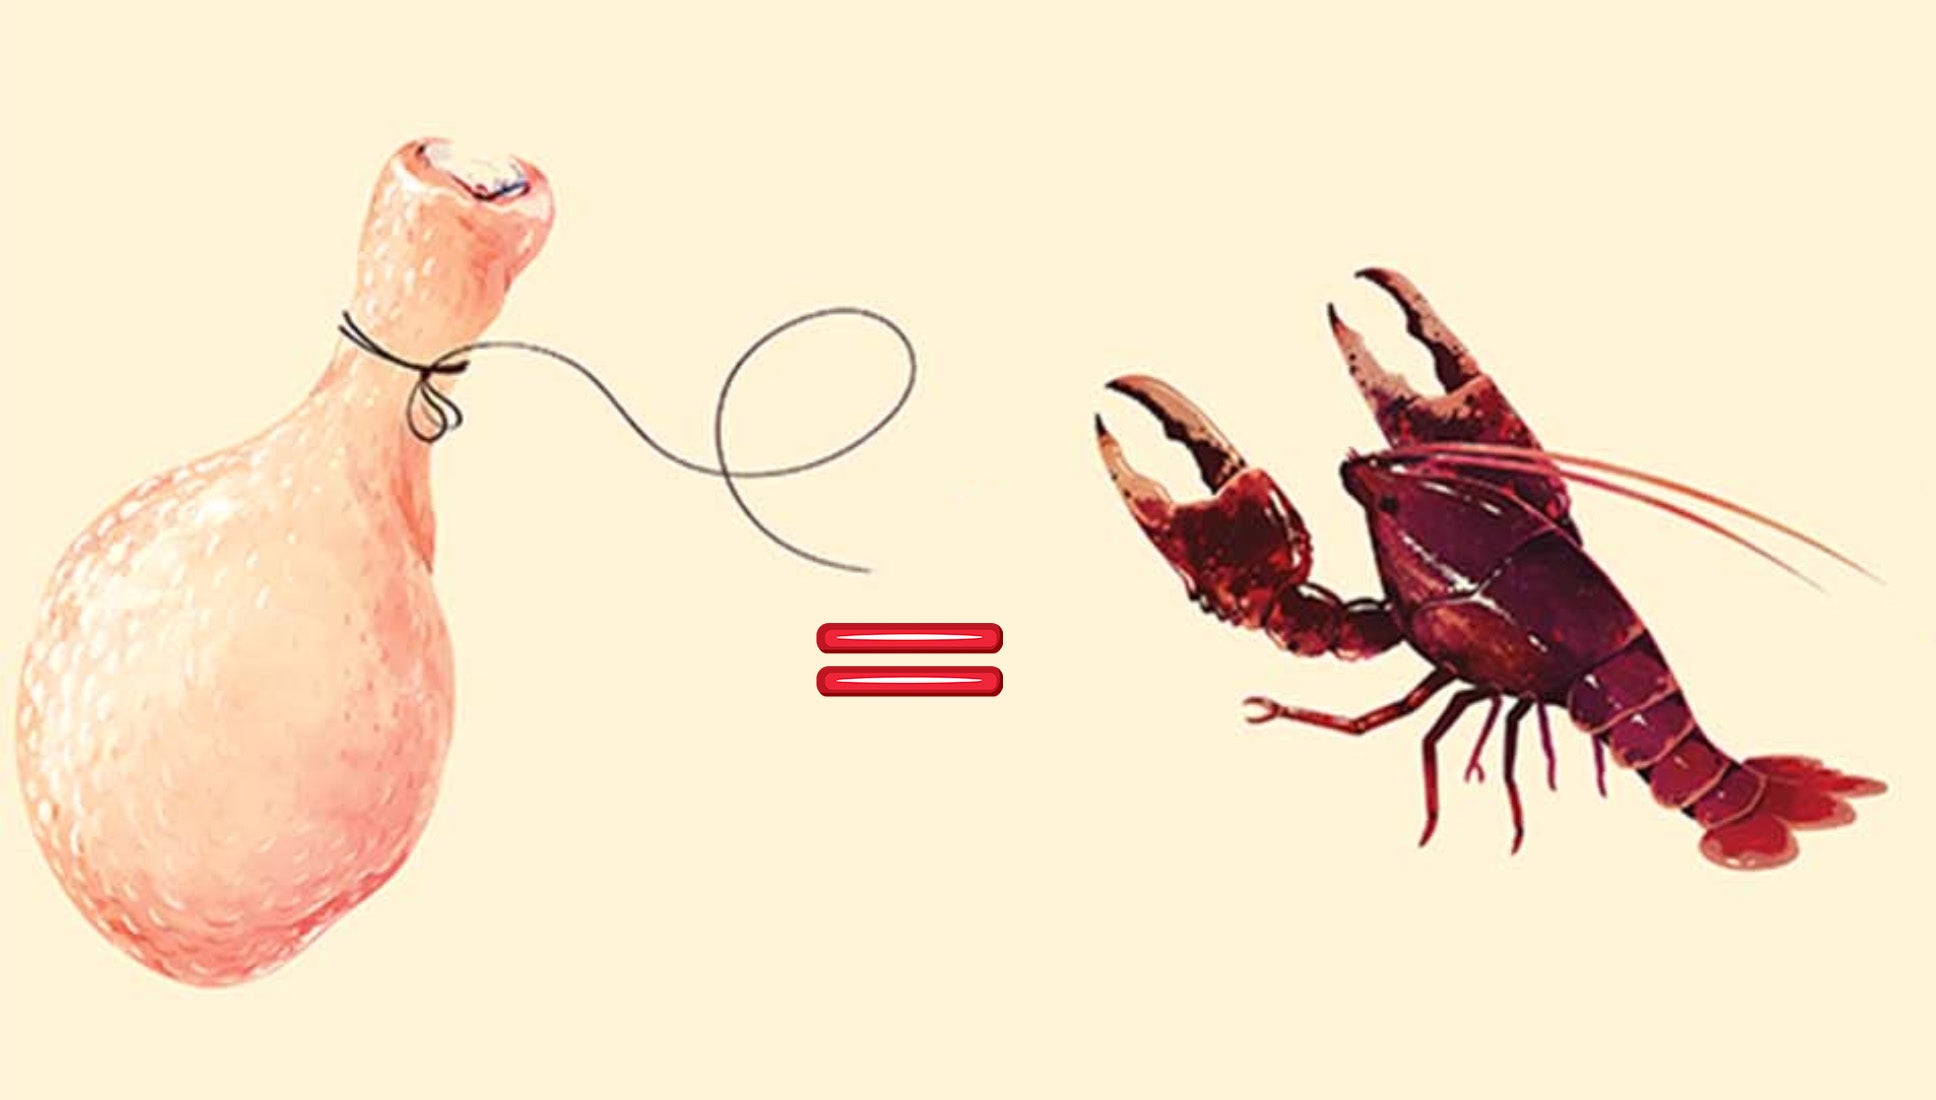 How to Catch Crawfish and Keep Them Alive